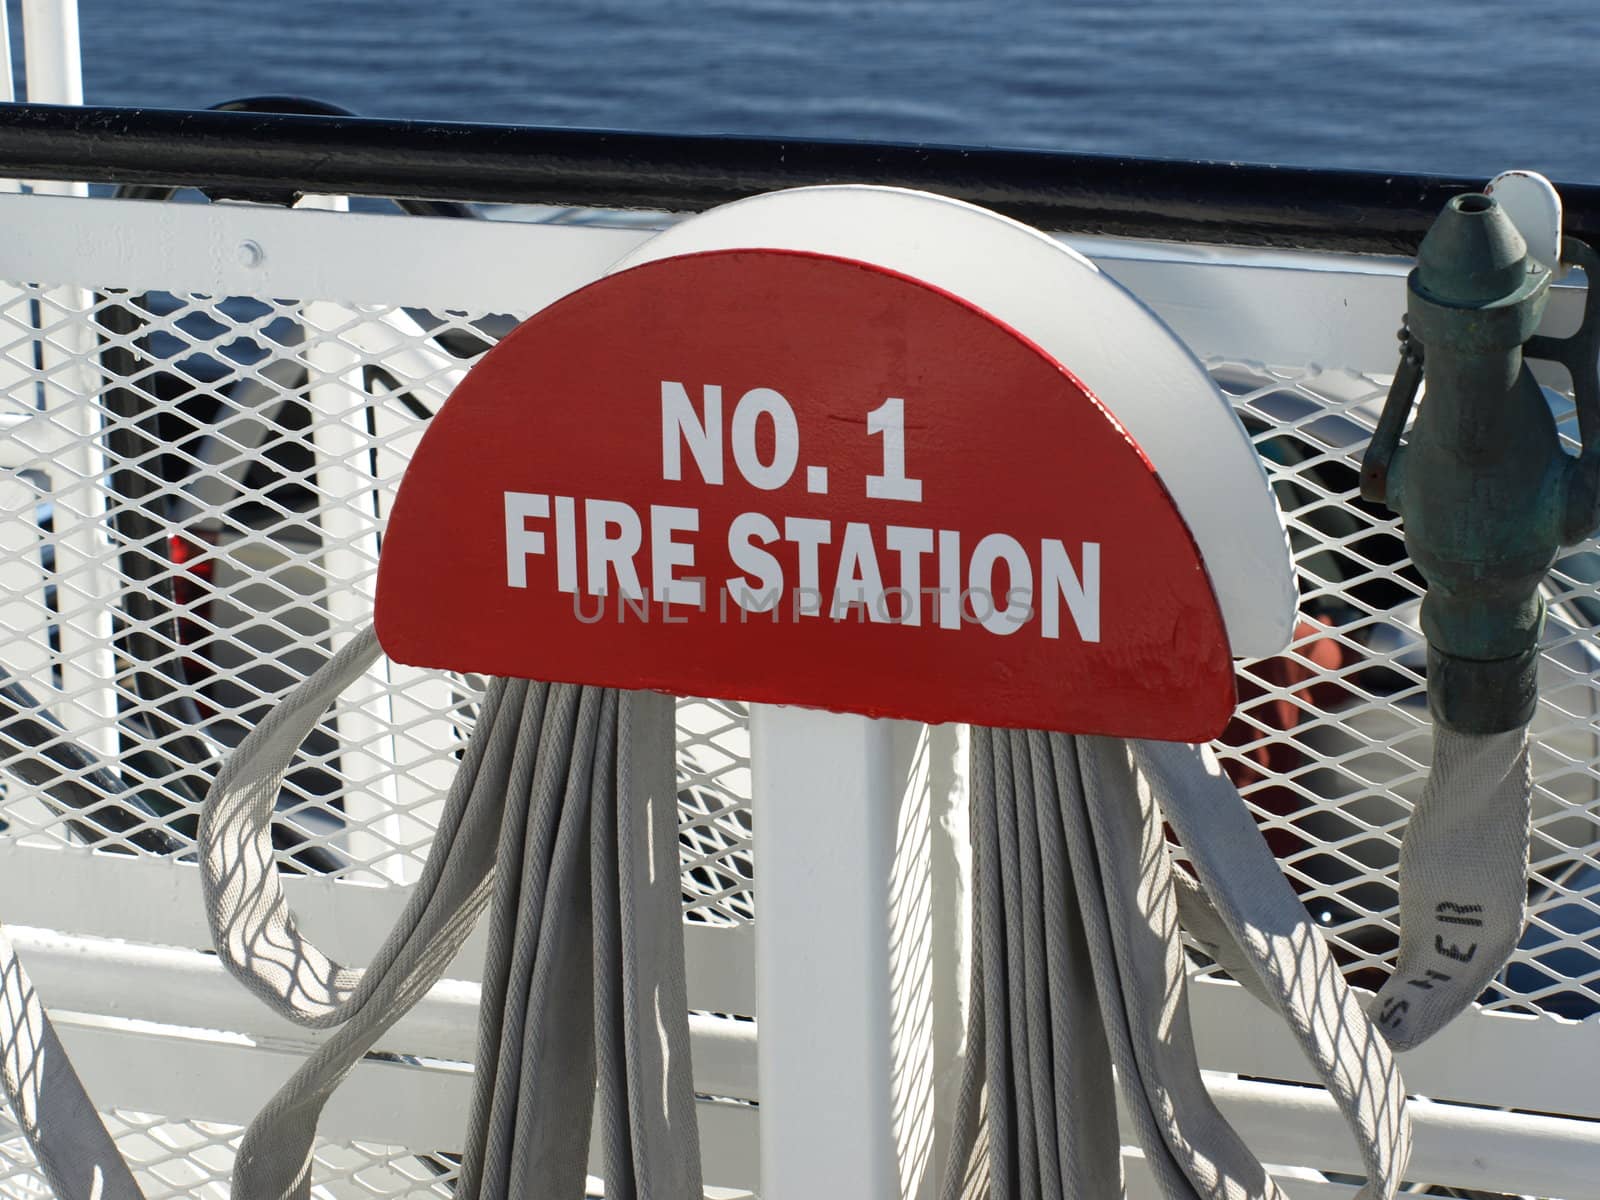 A fire station sign on a ferry crossing the water